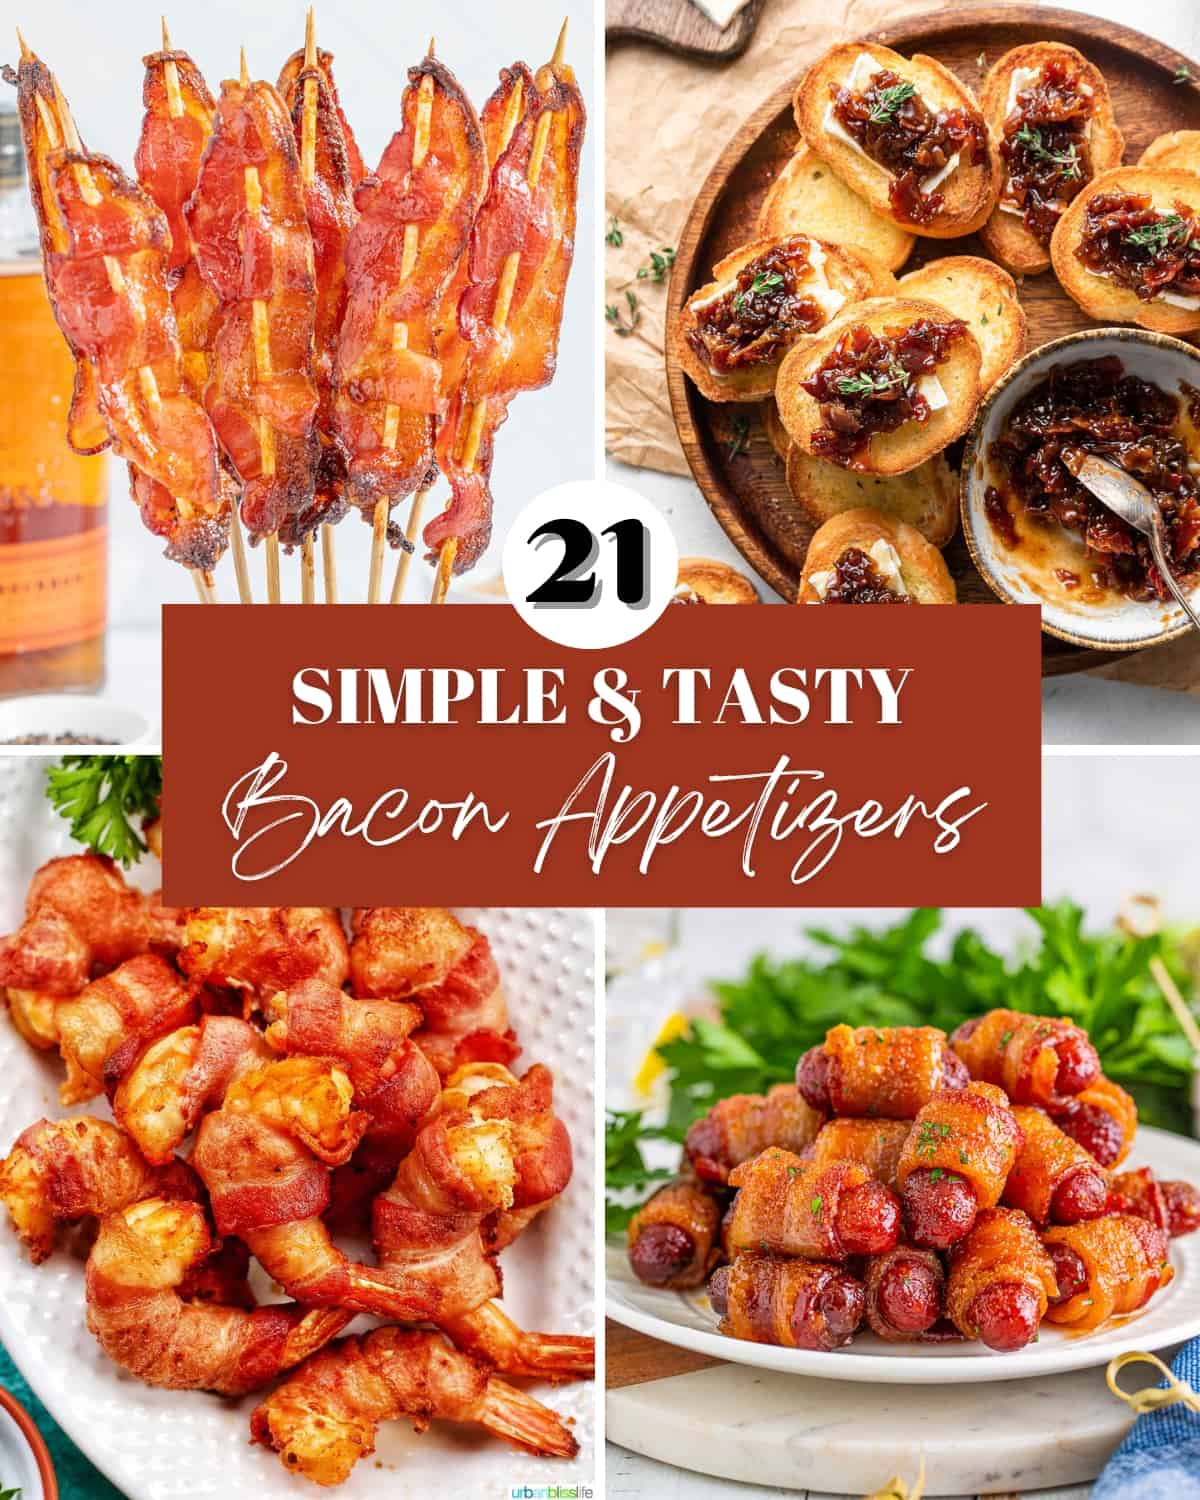 Candied bacon skewers, bourbon bacon jam crostini, several pieces of bacon wrapped shrimp and several pieces of brown sugar bacon little smokies with text that states "21 simple and tasty bacon appetizers".